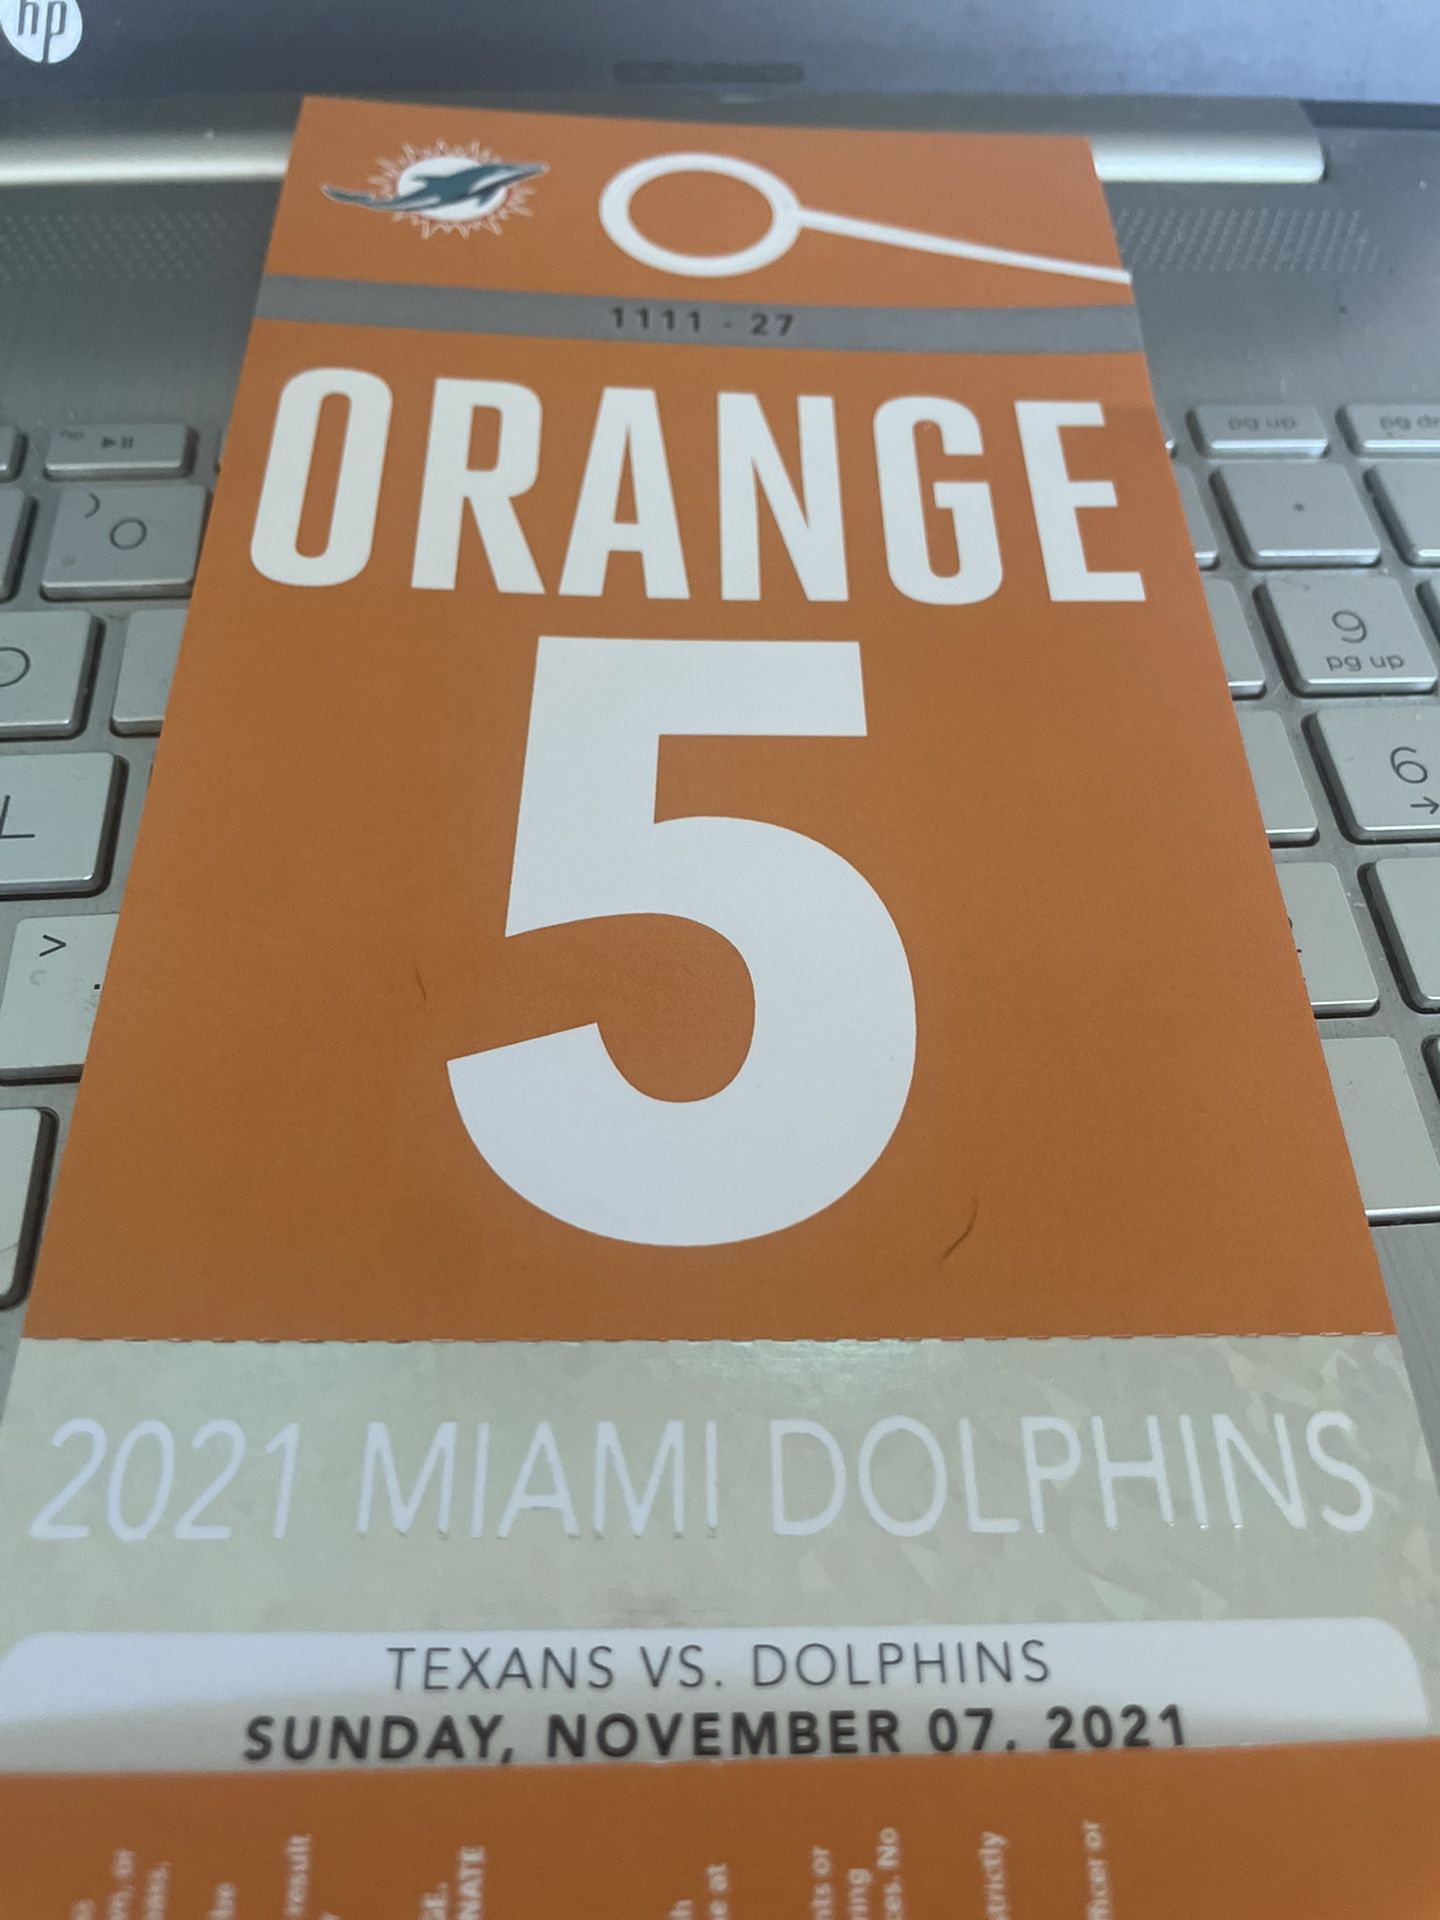 Miami Dolphins Orange parking Pass. Send Offers Will Meet In Person 